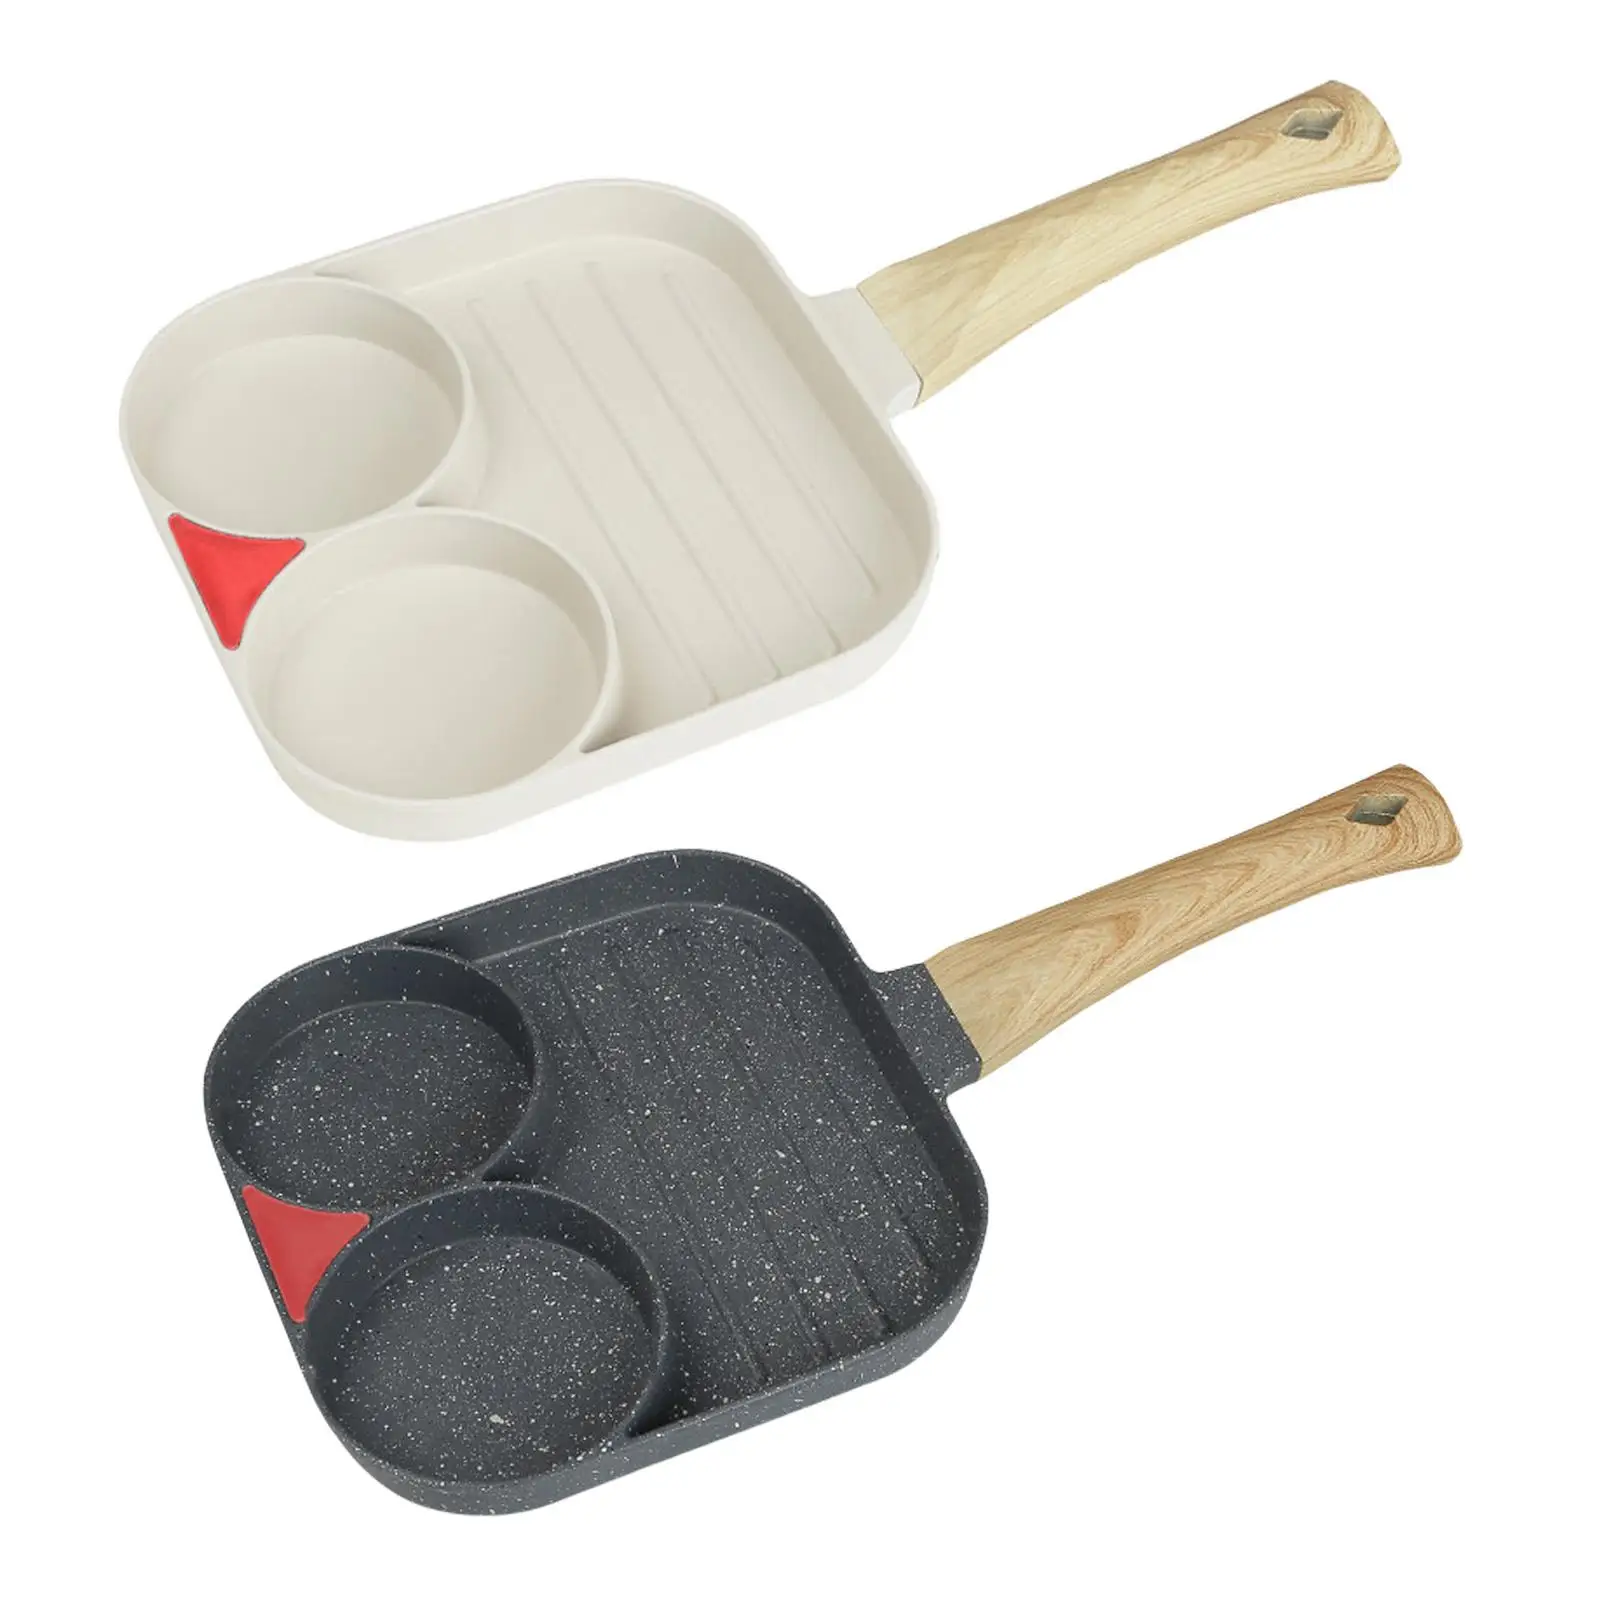 2 Hole Egg Frying Pan with Wooden Handle for Cooking Frying Steak Breakfast Burger